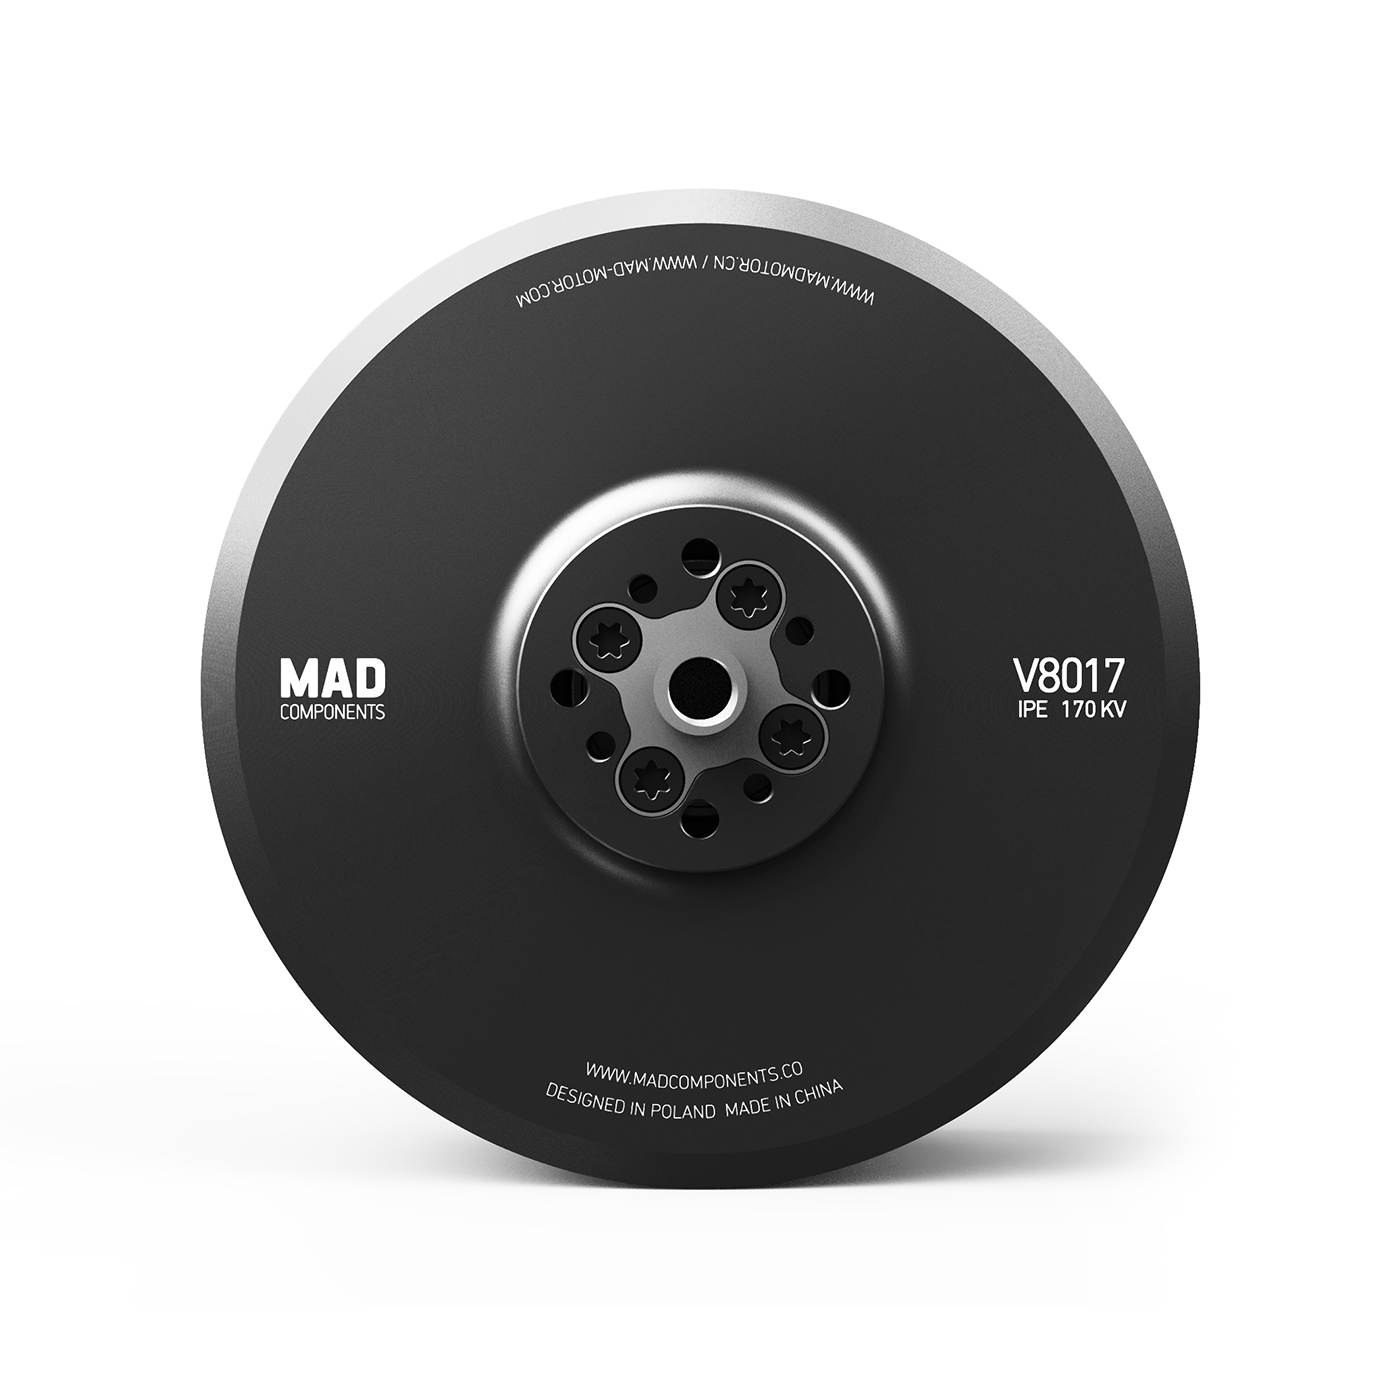 MAD V8017 IPE brushless motor for the classical  and big aerial photography, exploration, Archaeology, Remote sensing surveying, Mapping VTOL UAV drone aircraft